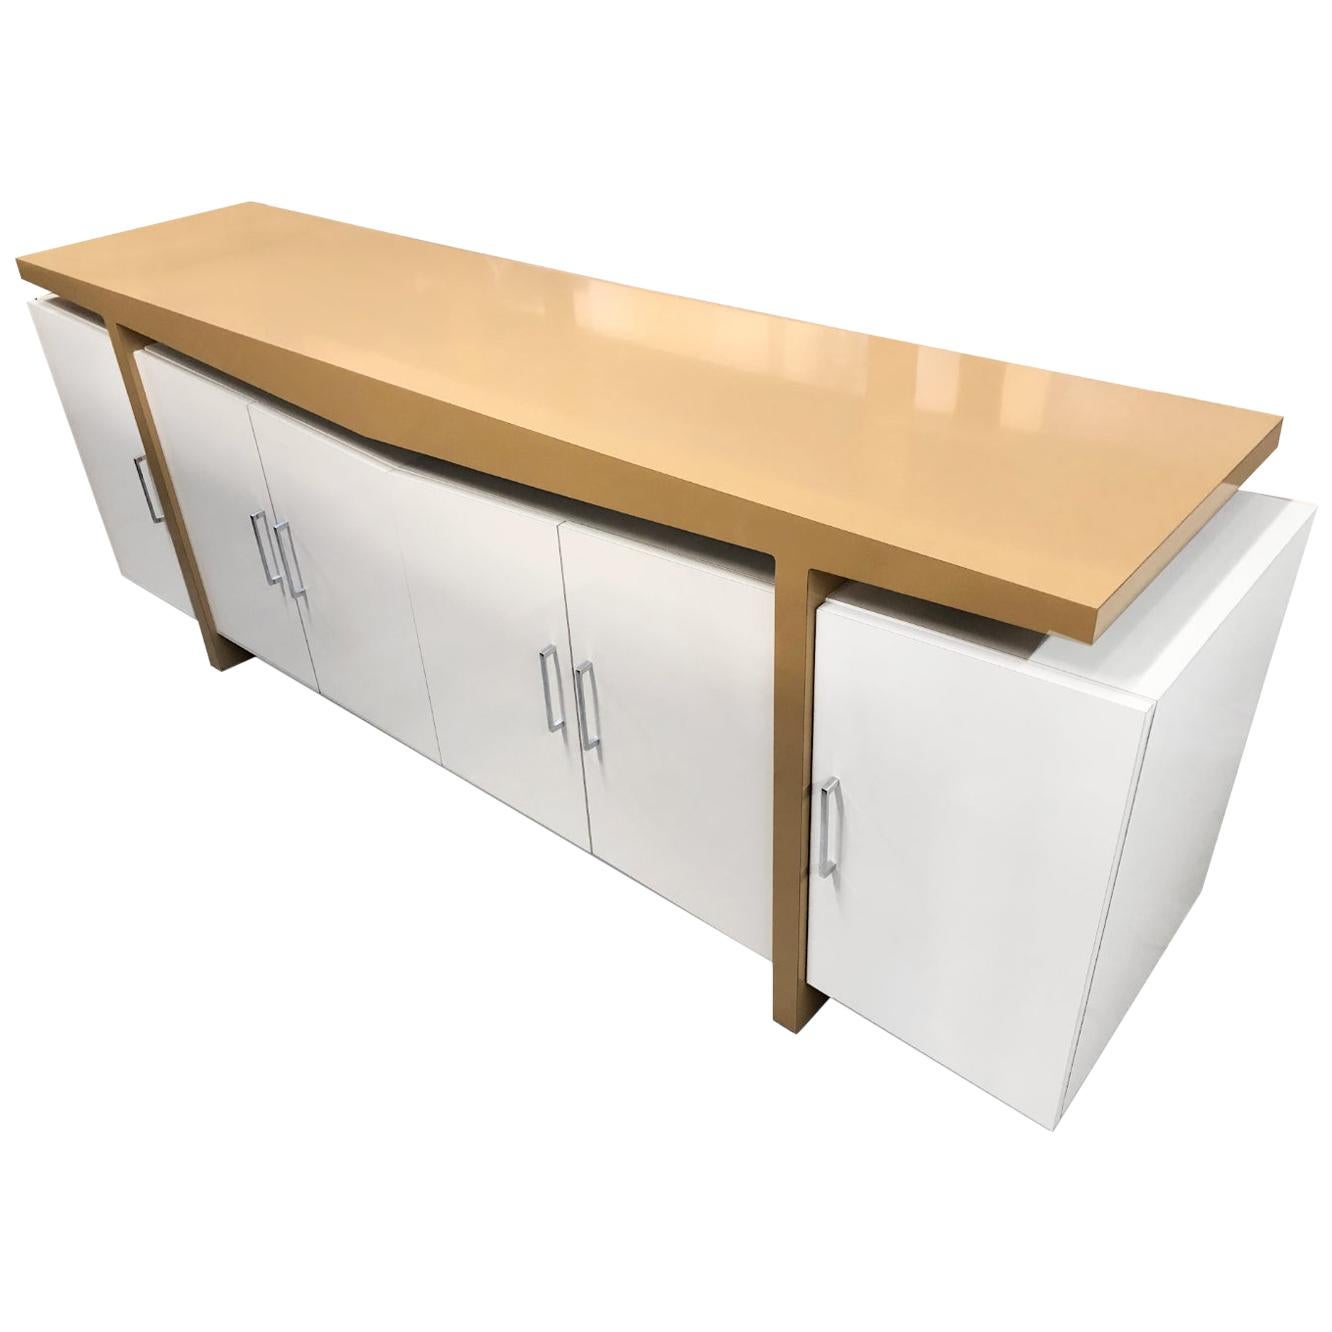 This nearly seven foot long custom made white and beige modern credenza is a real showstopper! If the shear size does not impress you, the architectural form will. The floating top surface is evocative of Frank Lloyd Wright. The sharply tailored